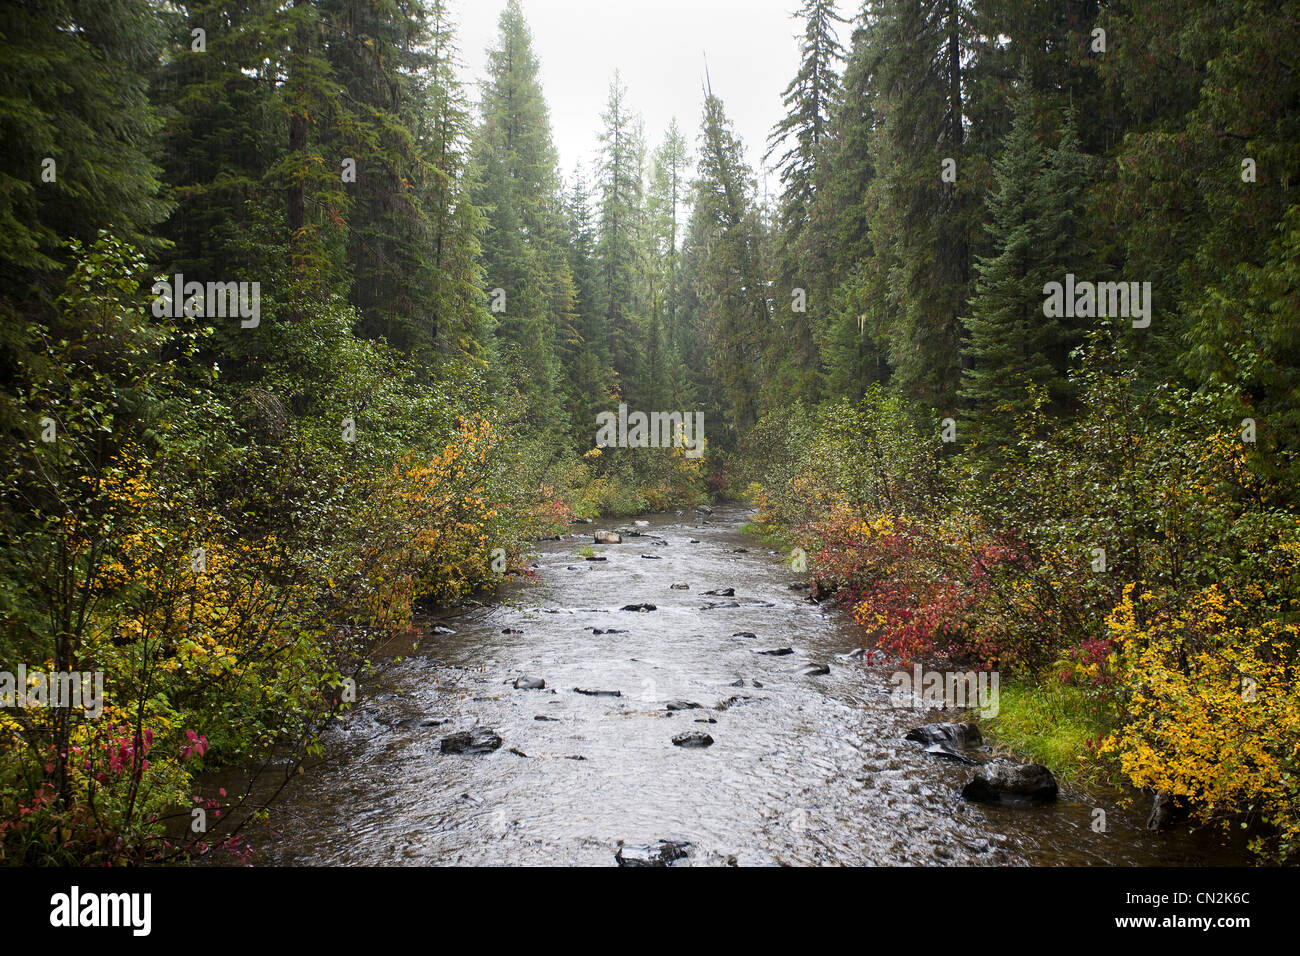 Misty River in Forest, Montana, USA Banque D'Images